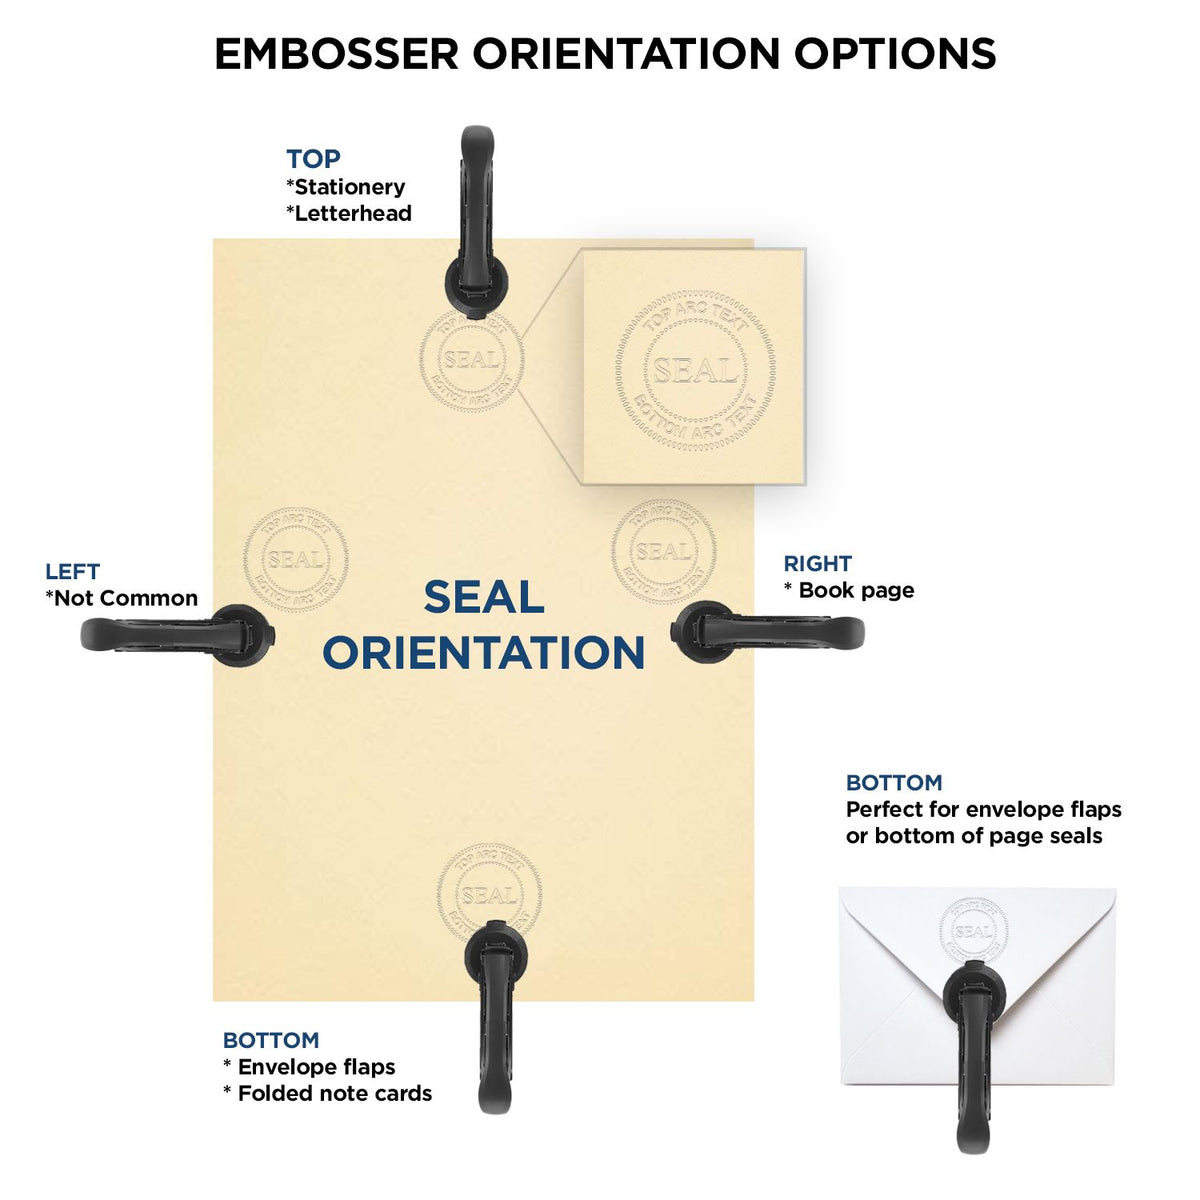 An infographic for the Handheld New York Professional Engineer Embosser showing embosser orientation, this is showing examples of a top, bottom, right and left insert.